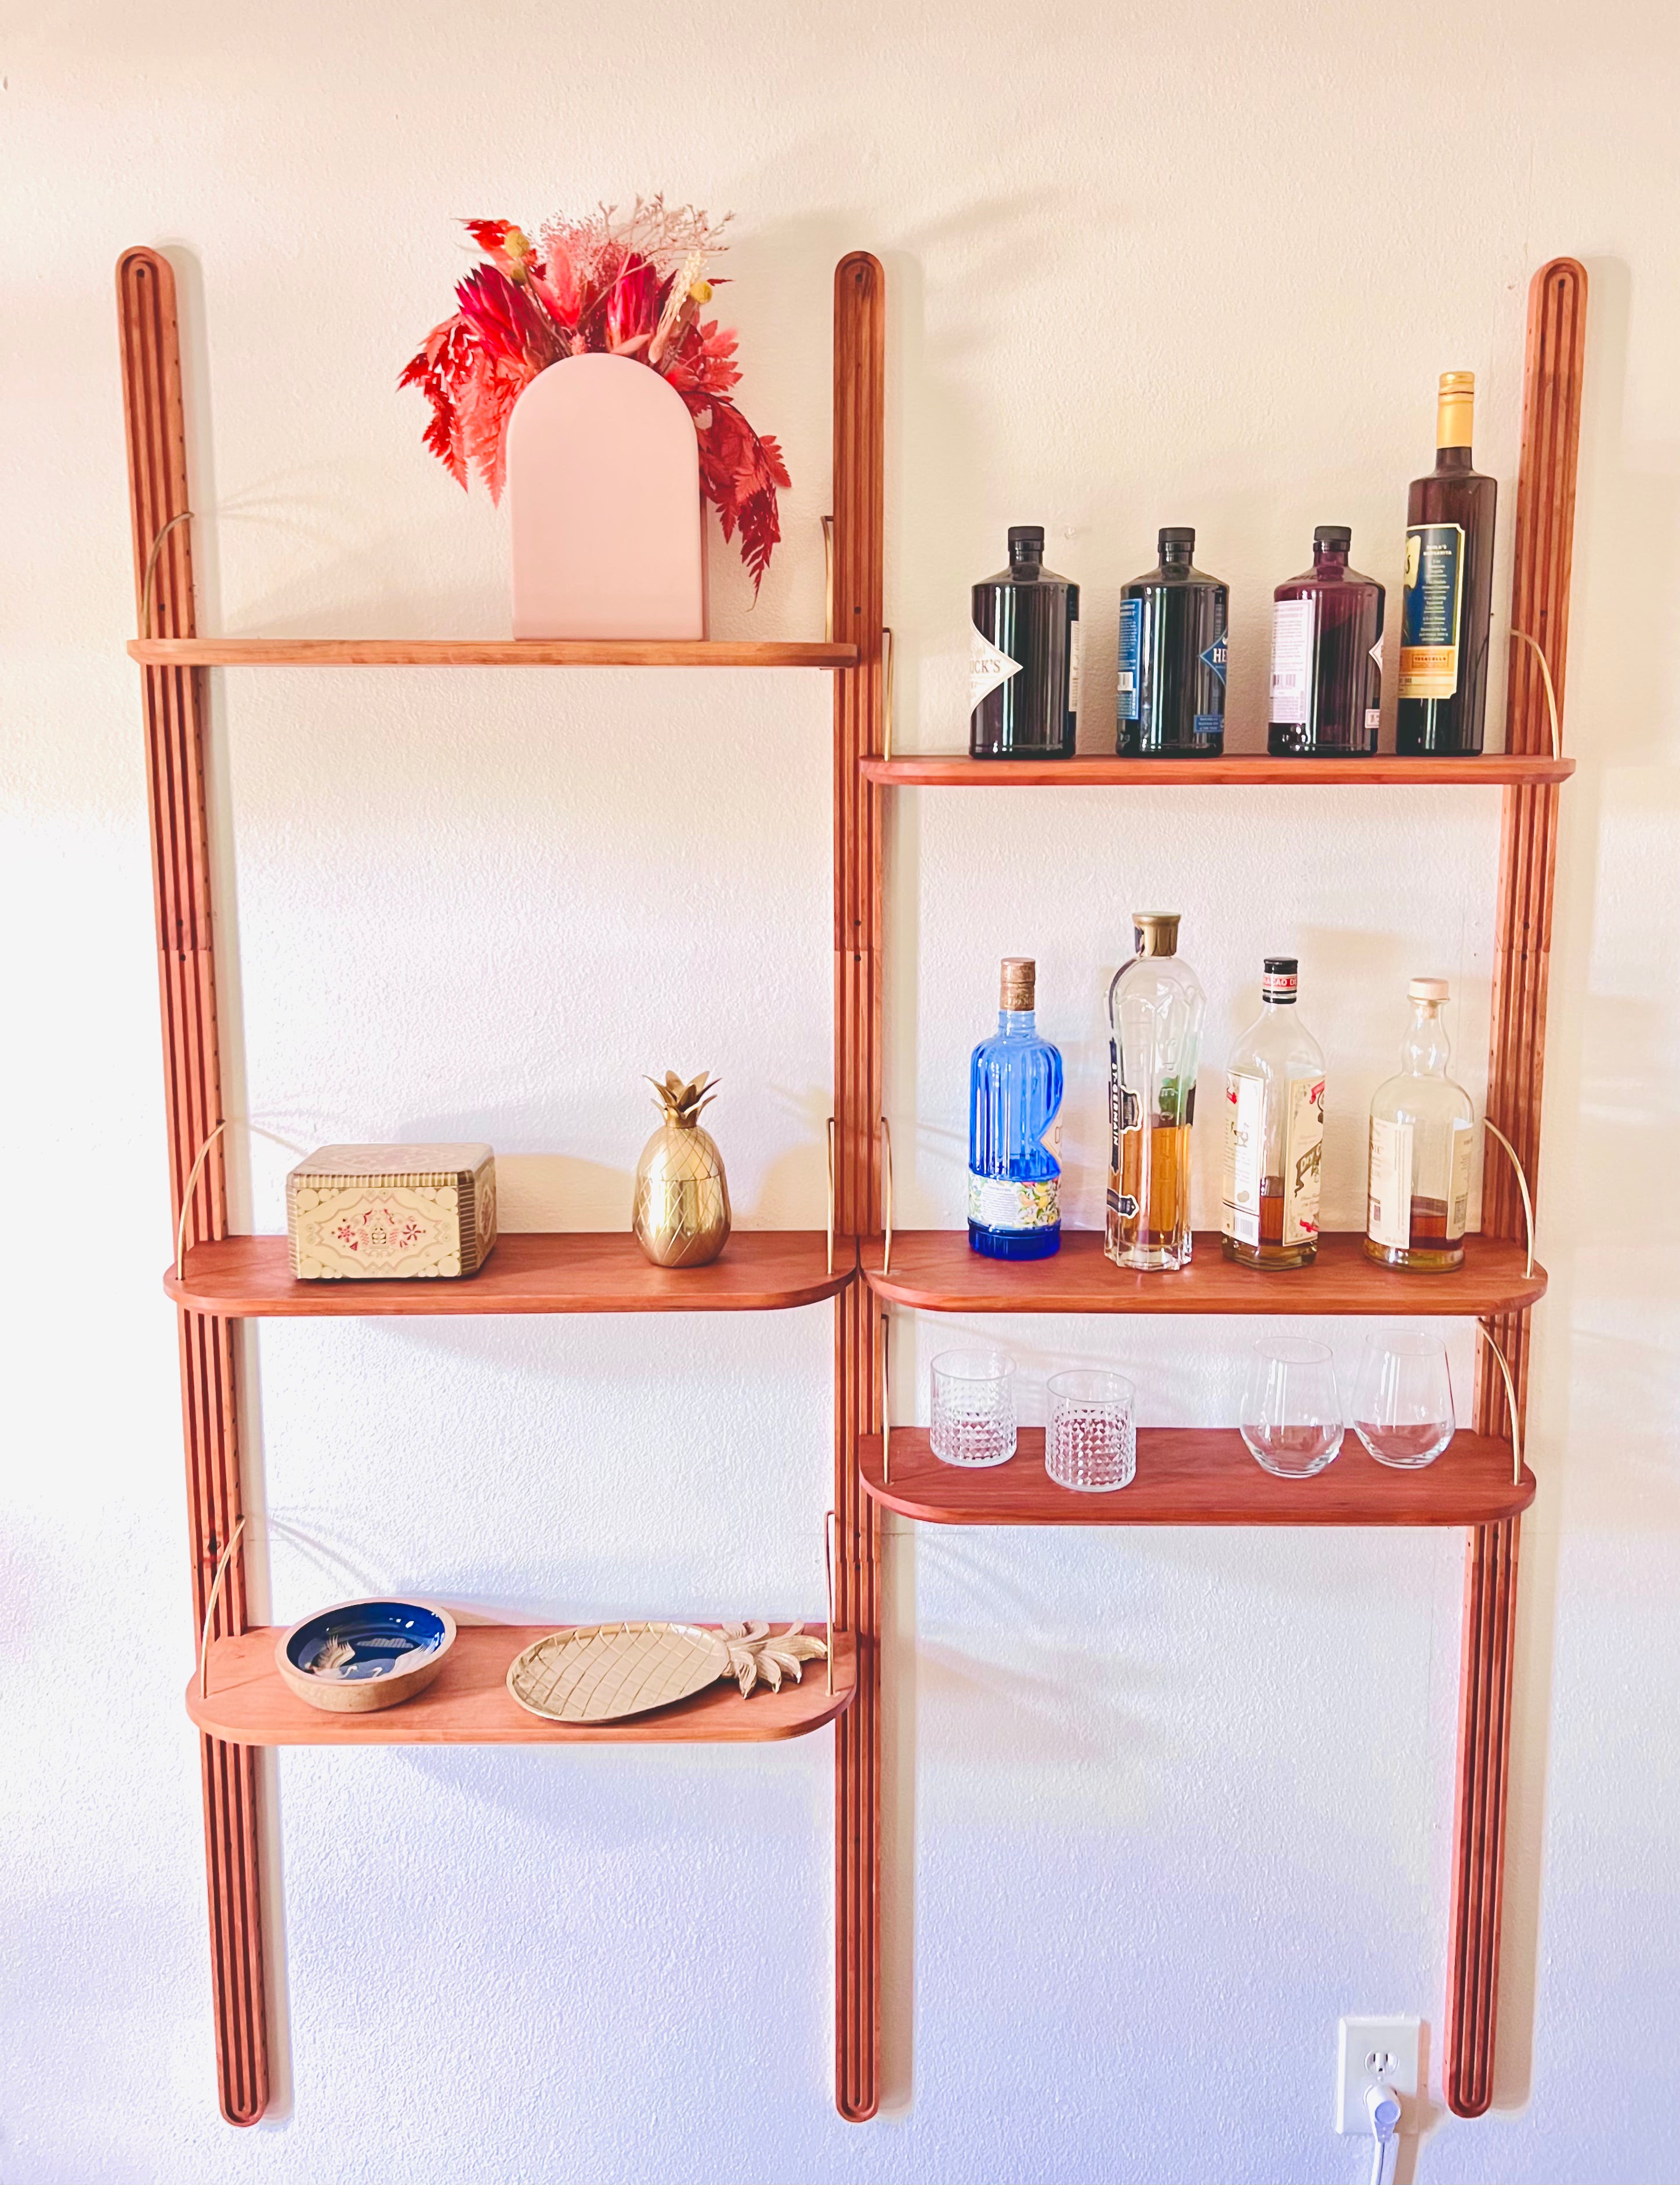 Magnus - Mid-century modern, modular shelving and cabinet system